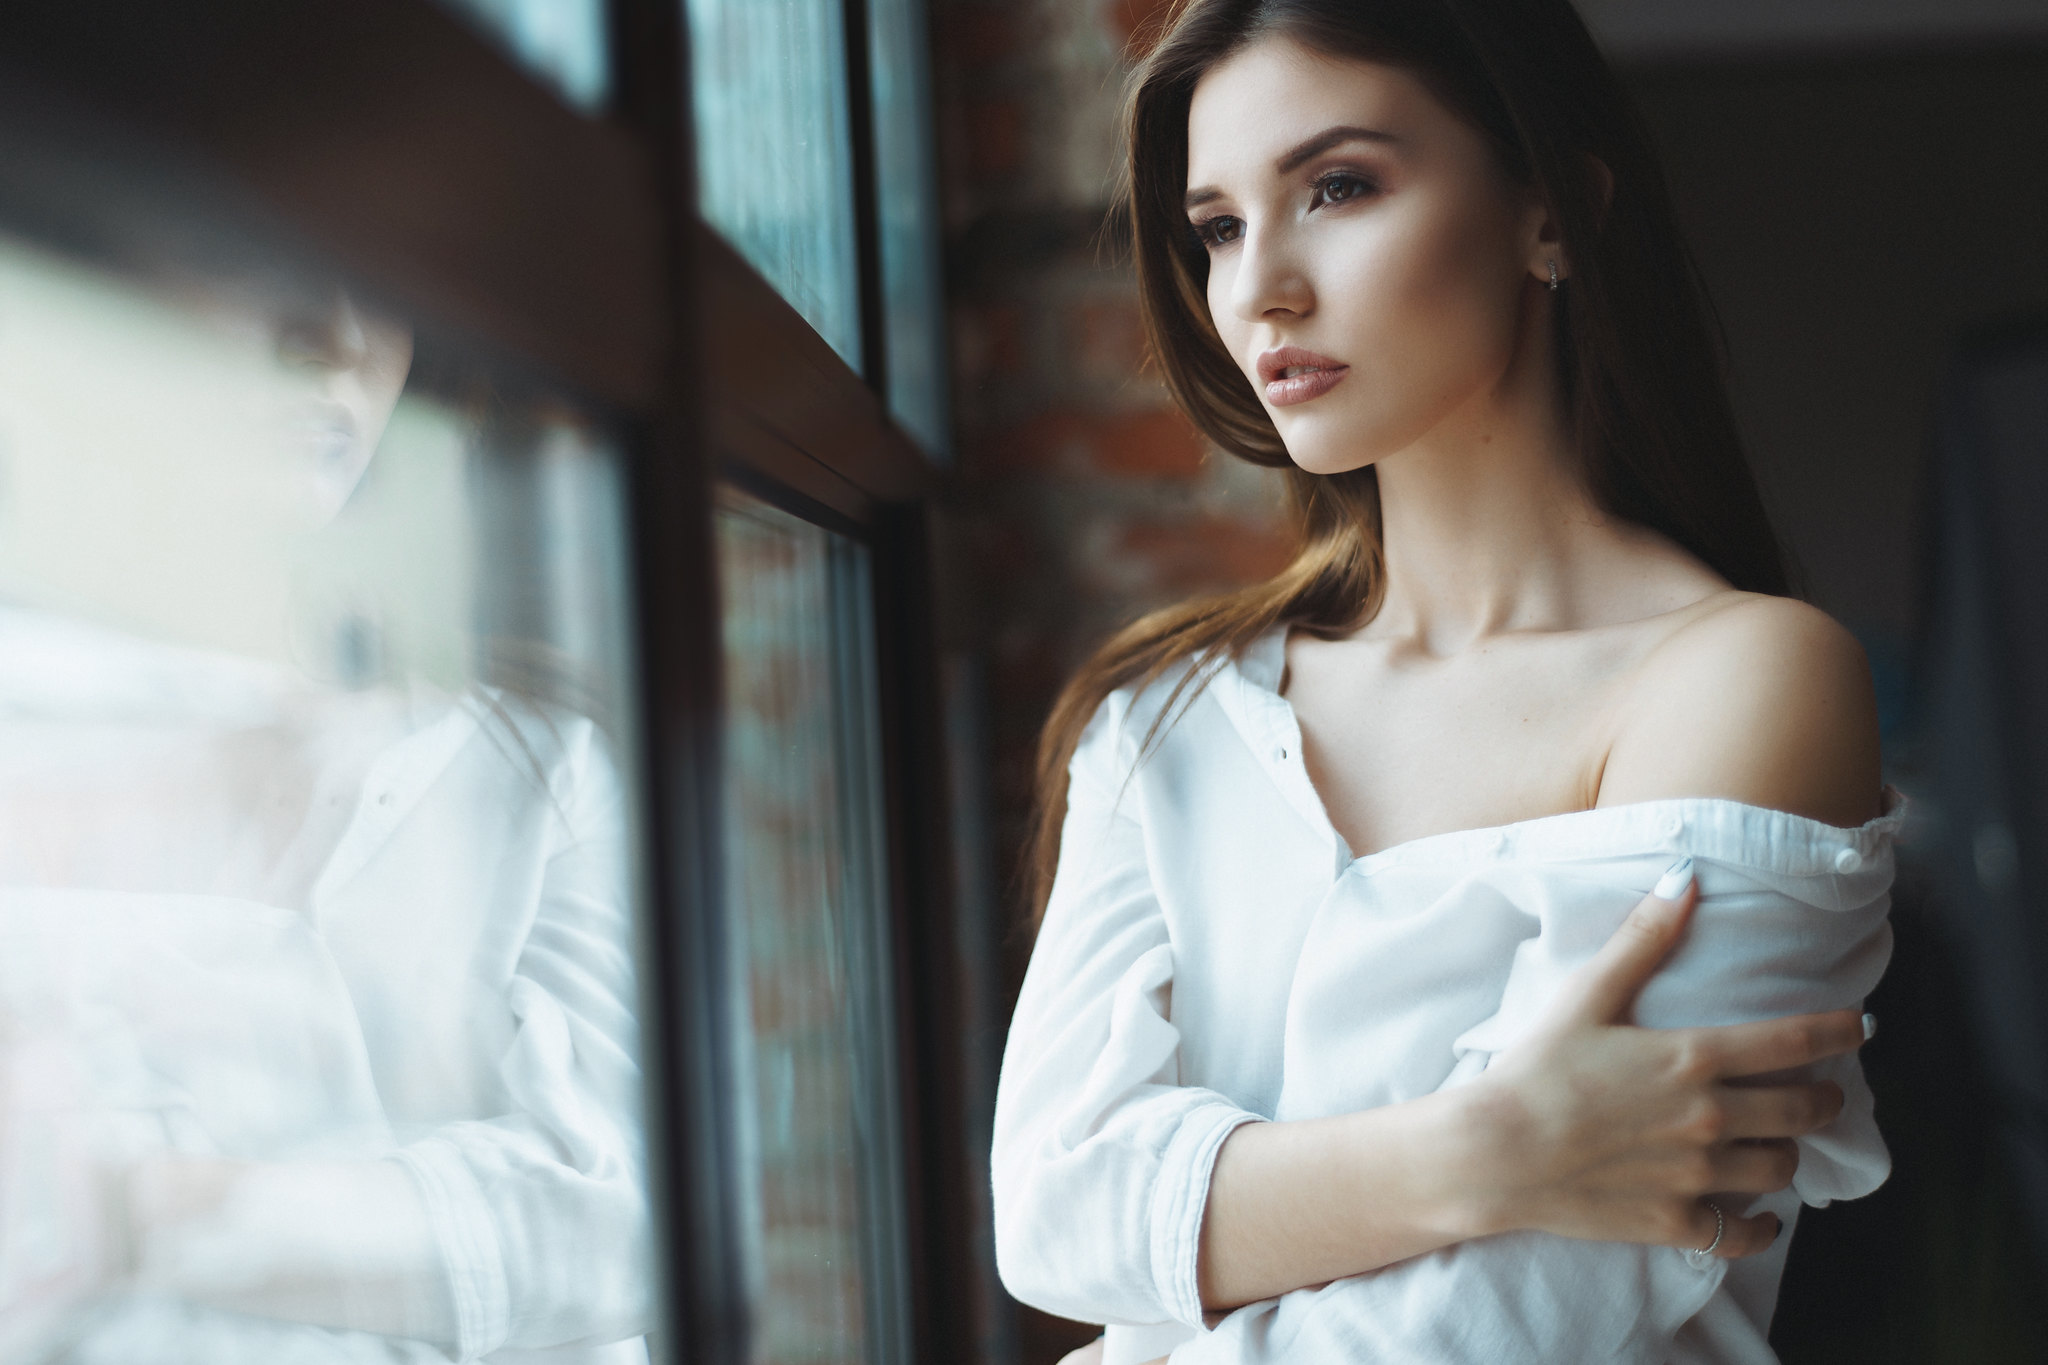 People 2048x1365 women portrait model brunette brown eyes open mouth bare shoulders white shirt profile white nails looking out window shirt